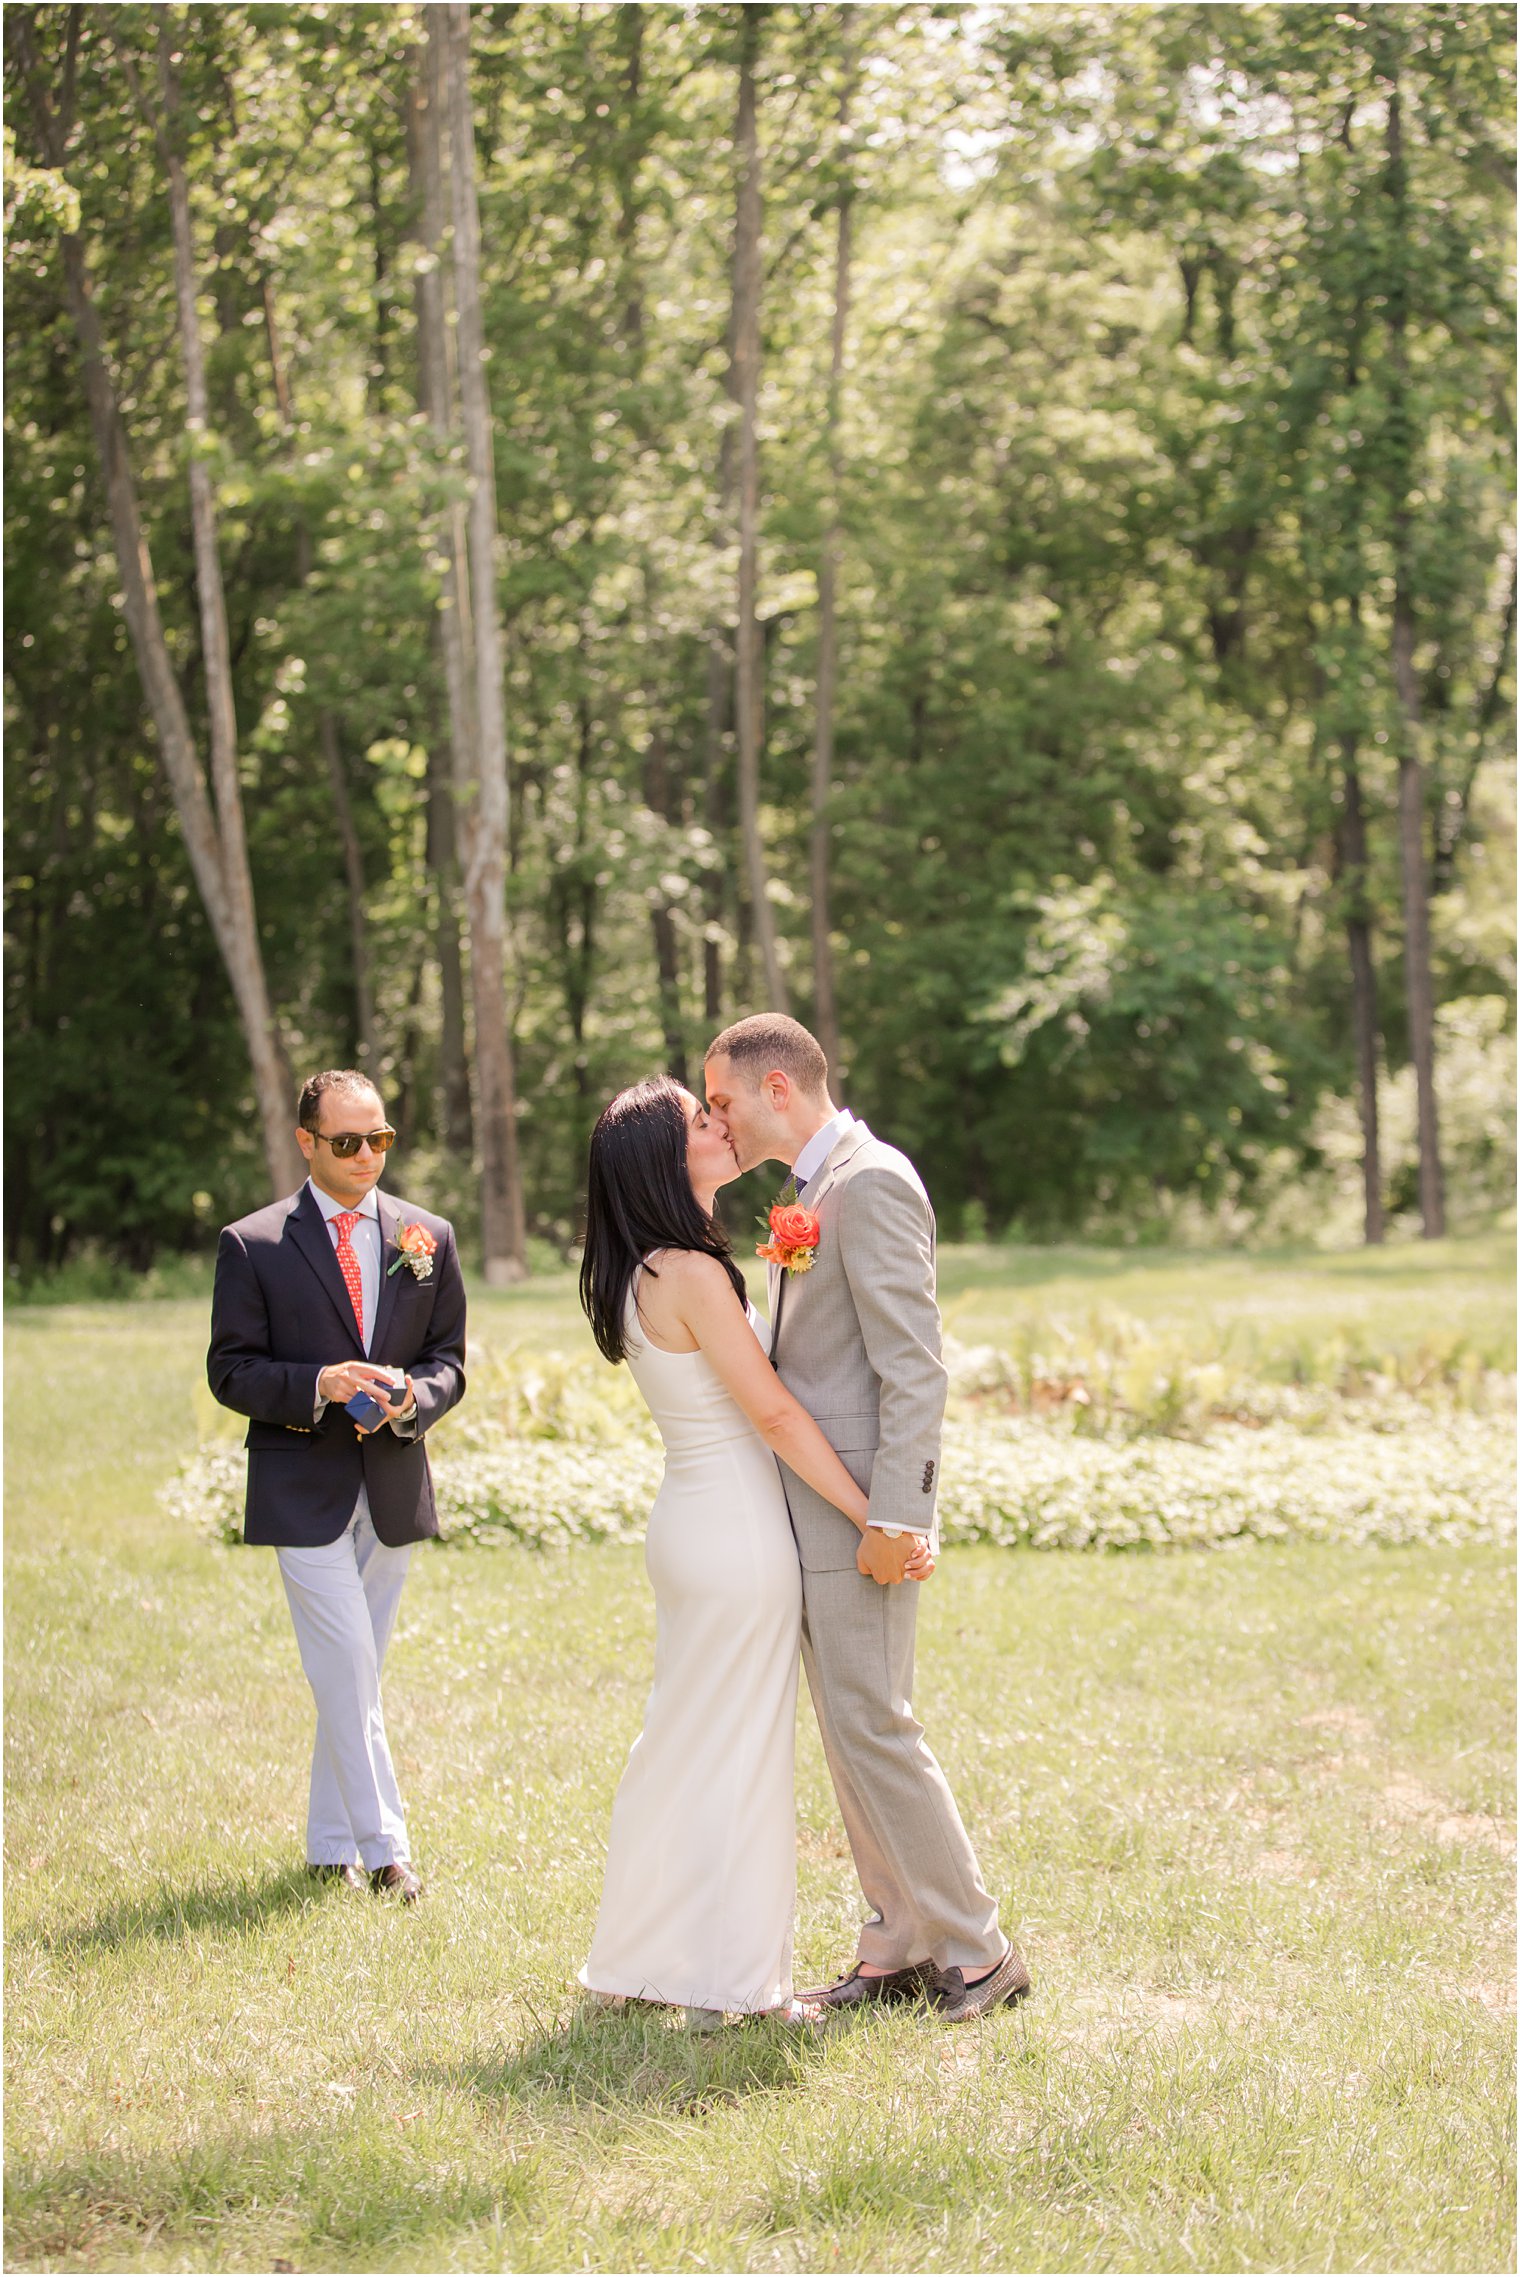 First kiss as husband and wife | Micro wedding during COVID-19